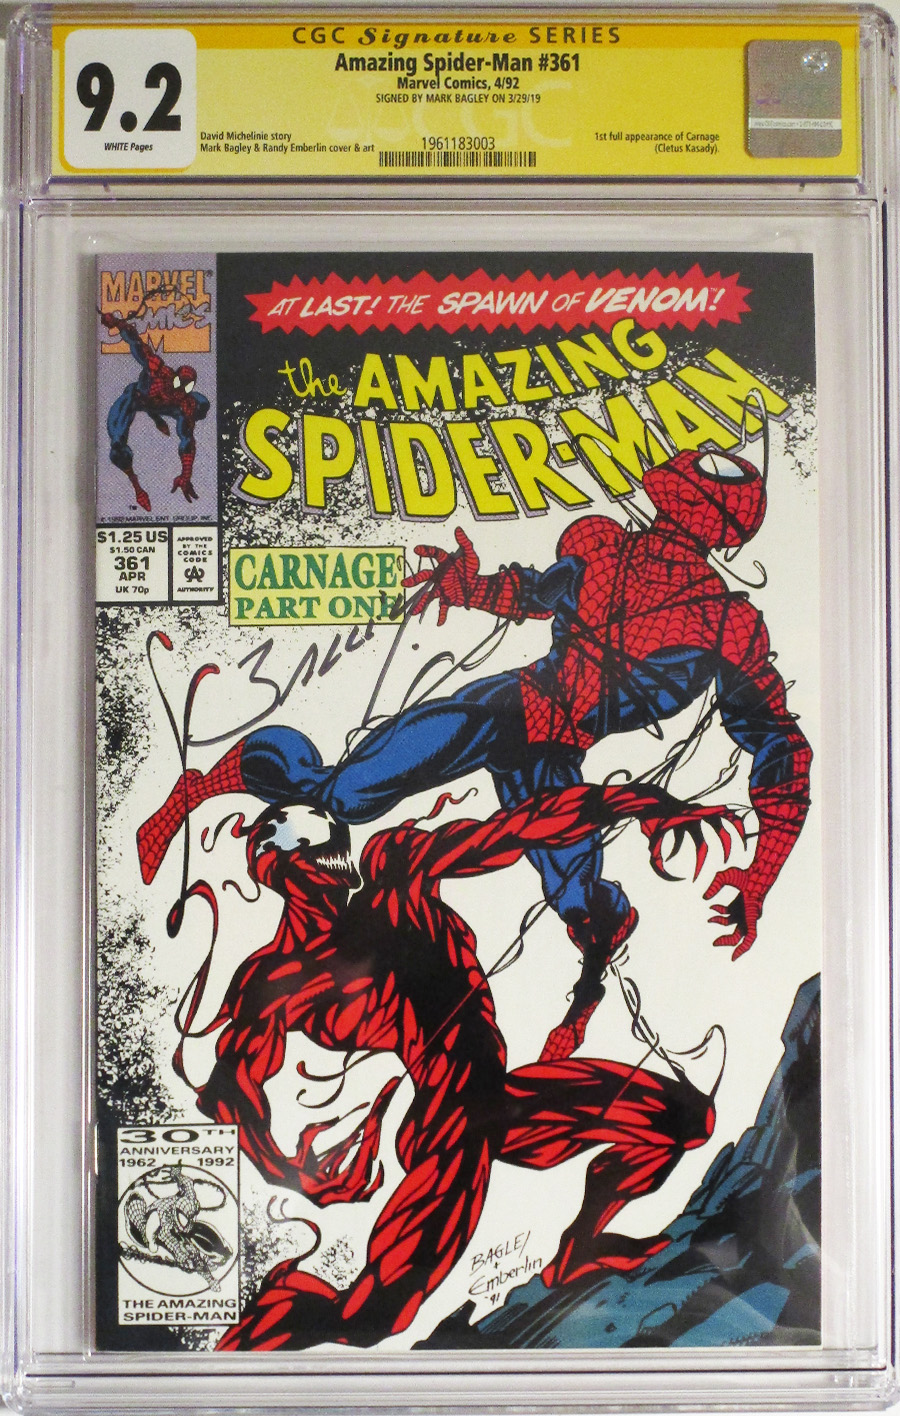 Amazing Spider-Man #361 Cover D CGC Signature Series 9.2 Signed by Mark Bagley